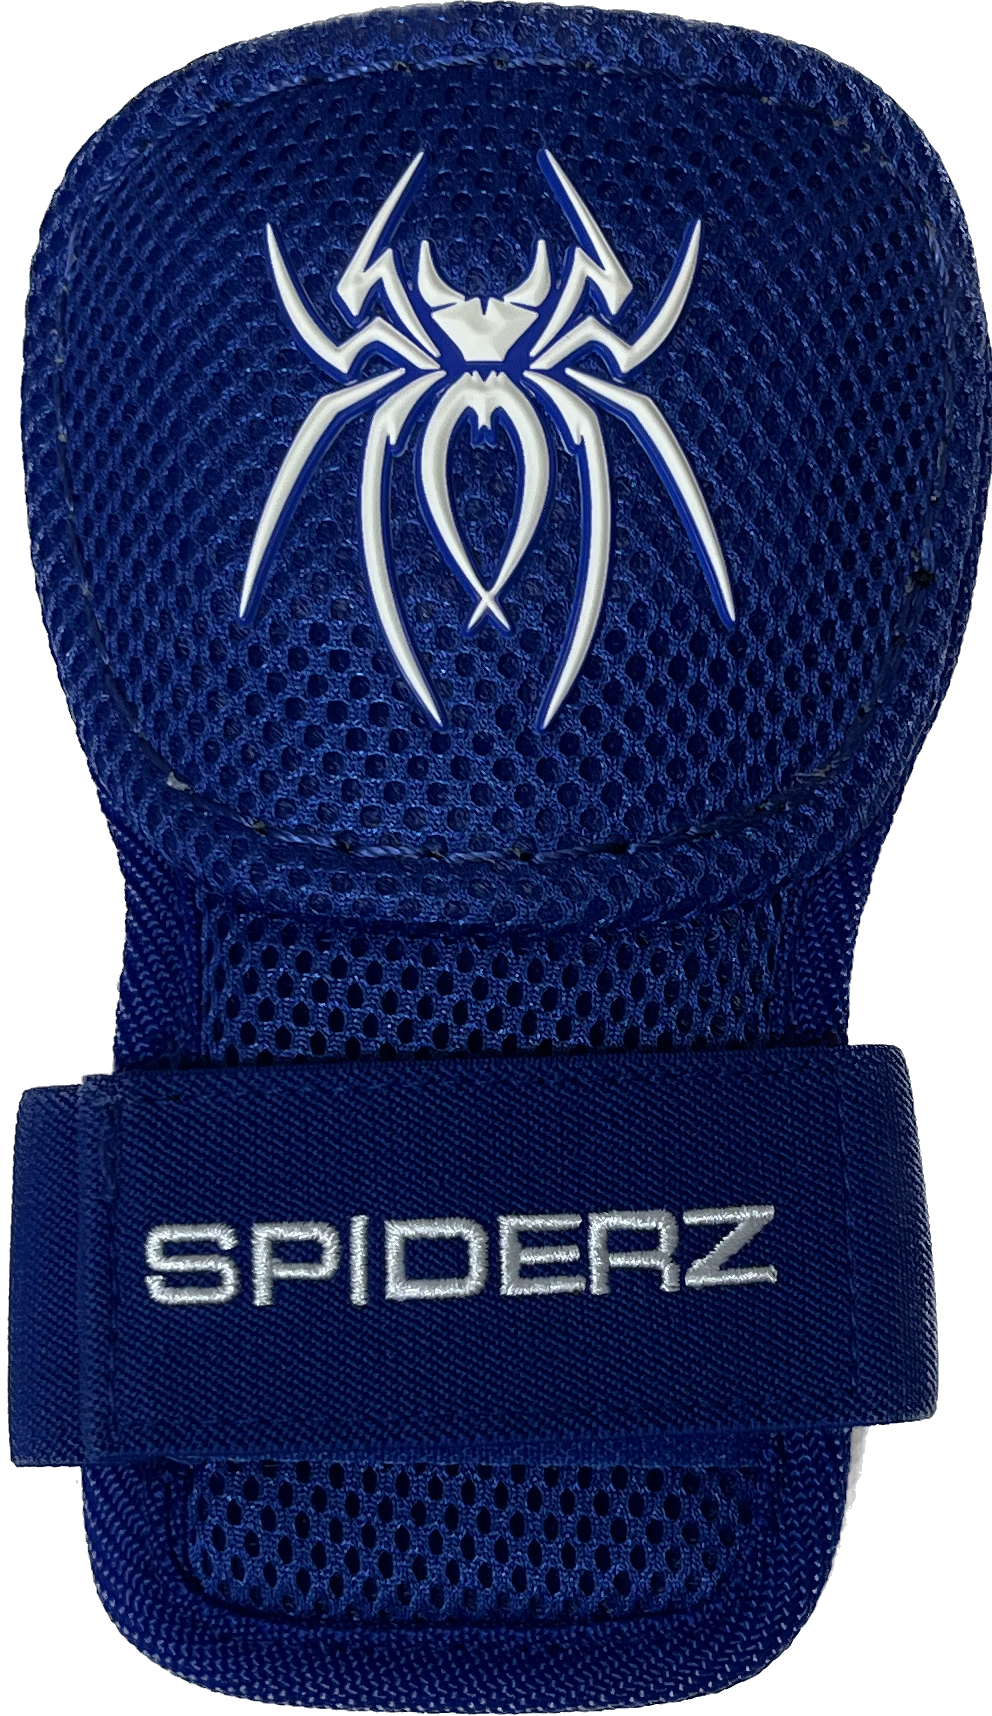 Spiderz Hand Guard (7 color options)